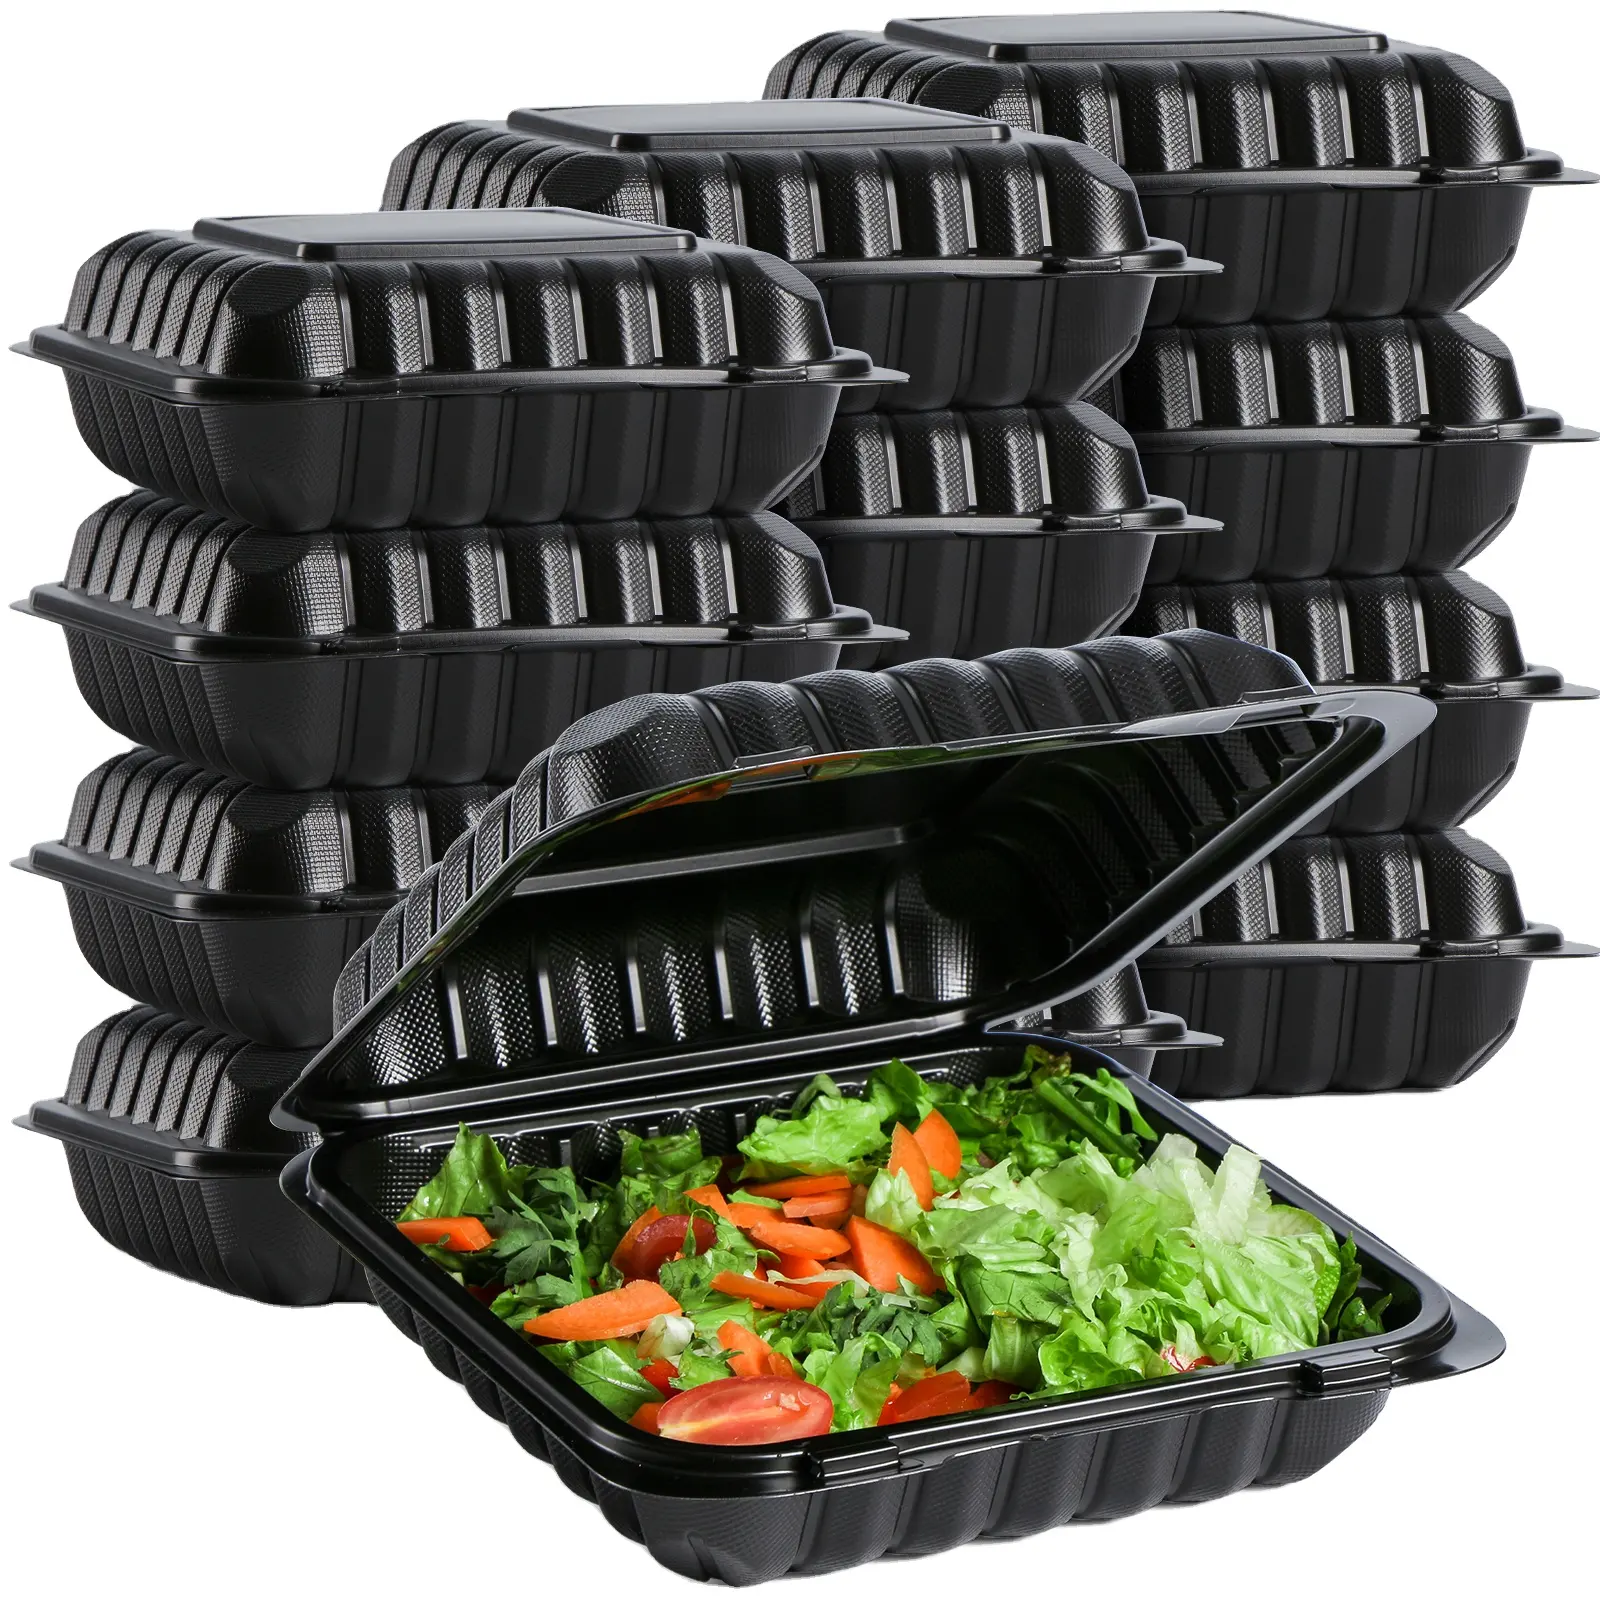 Factory Mfpp Takeaway Food Containers Reusable Microwave Safe Plastic Clamshell Take Out To Go Box